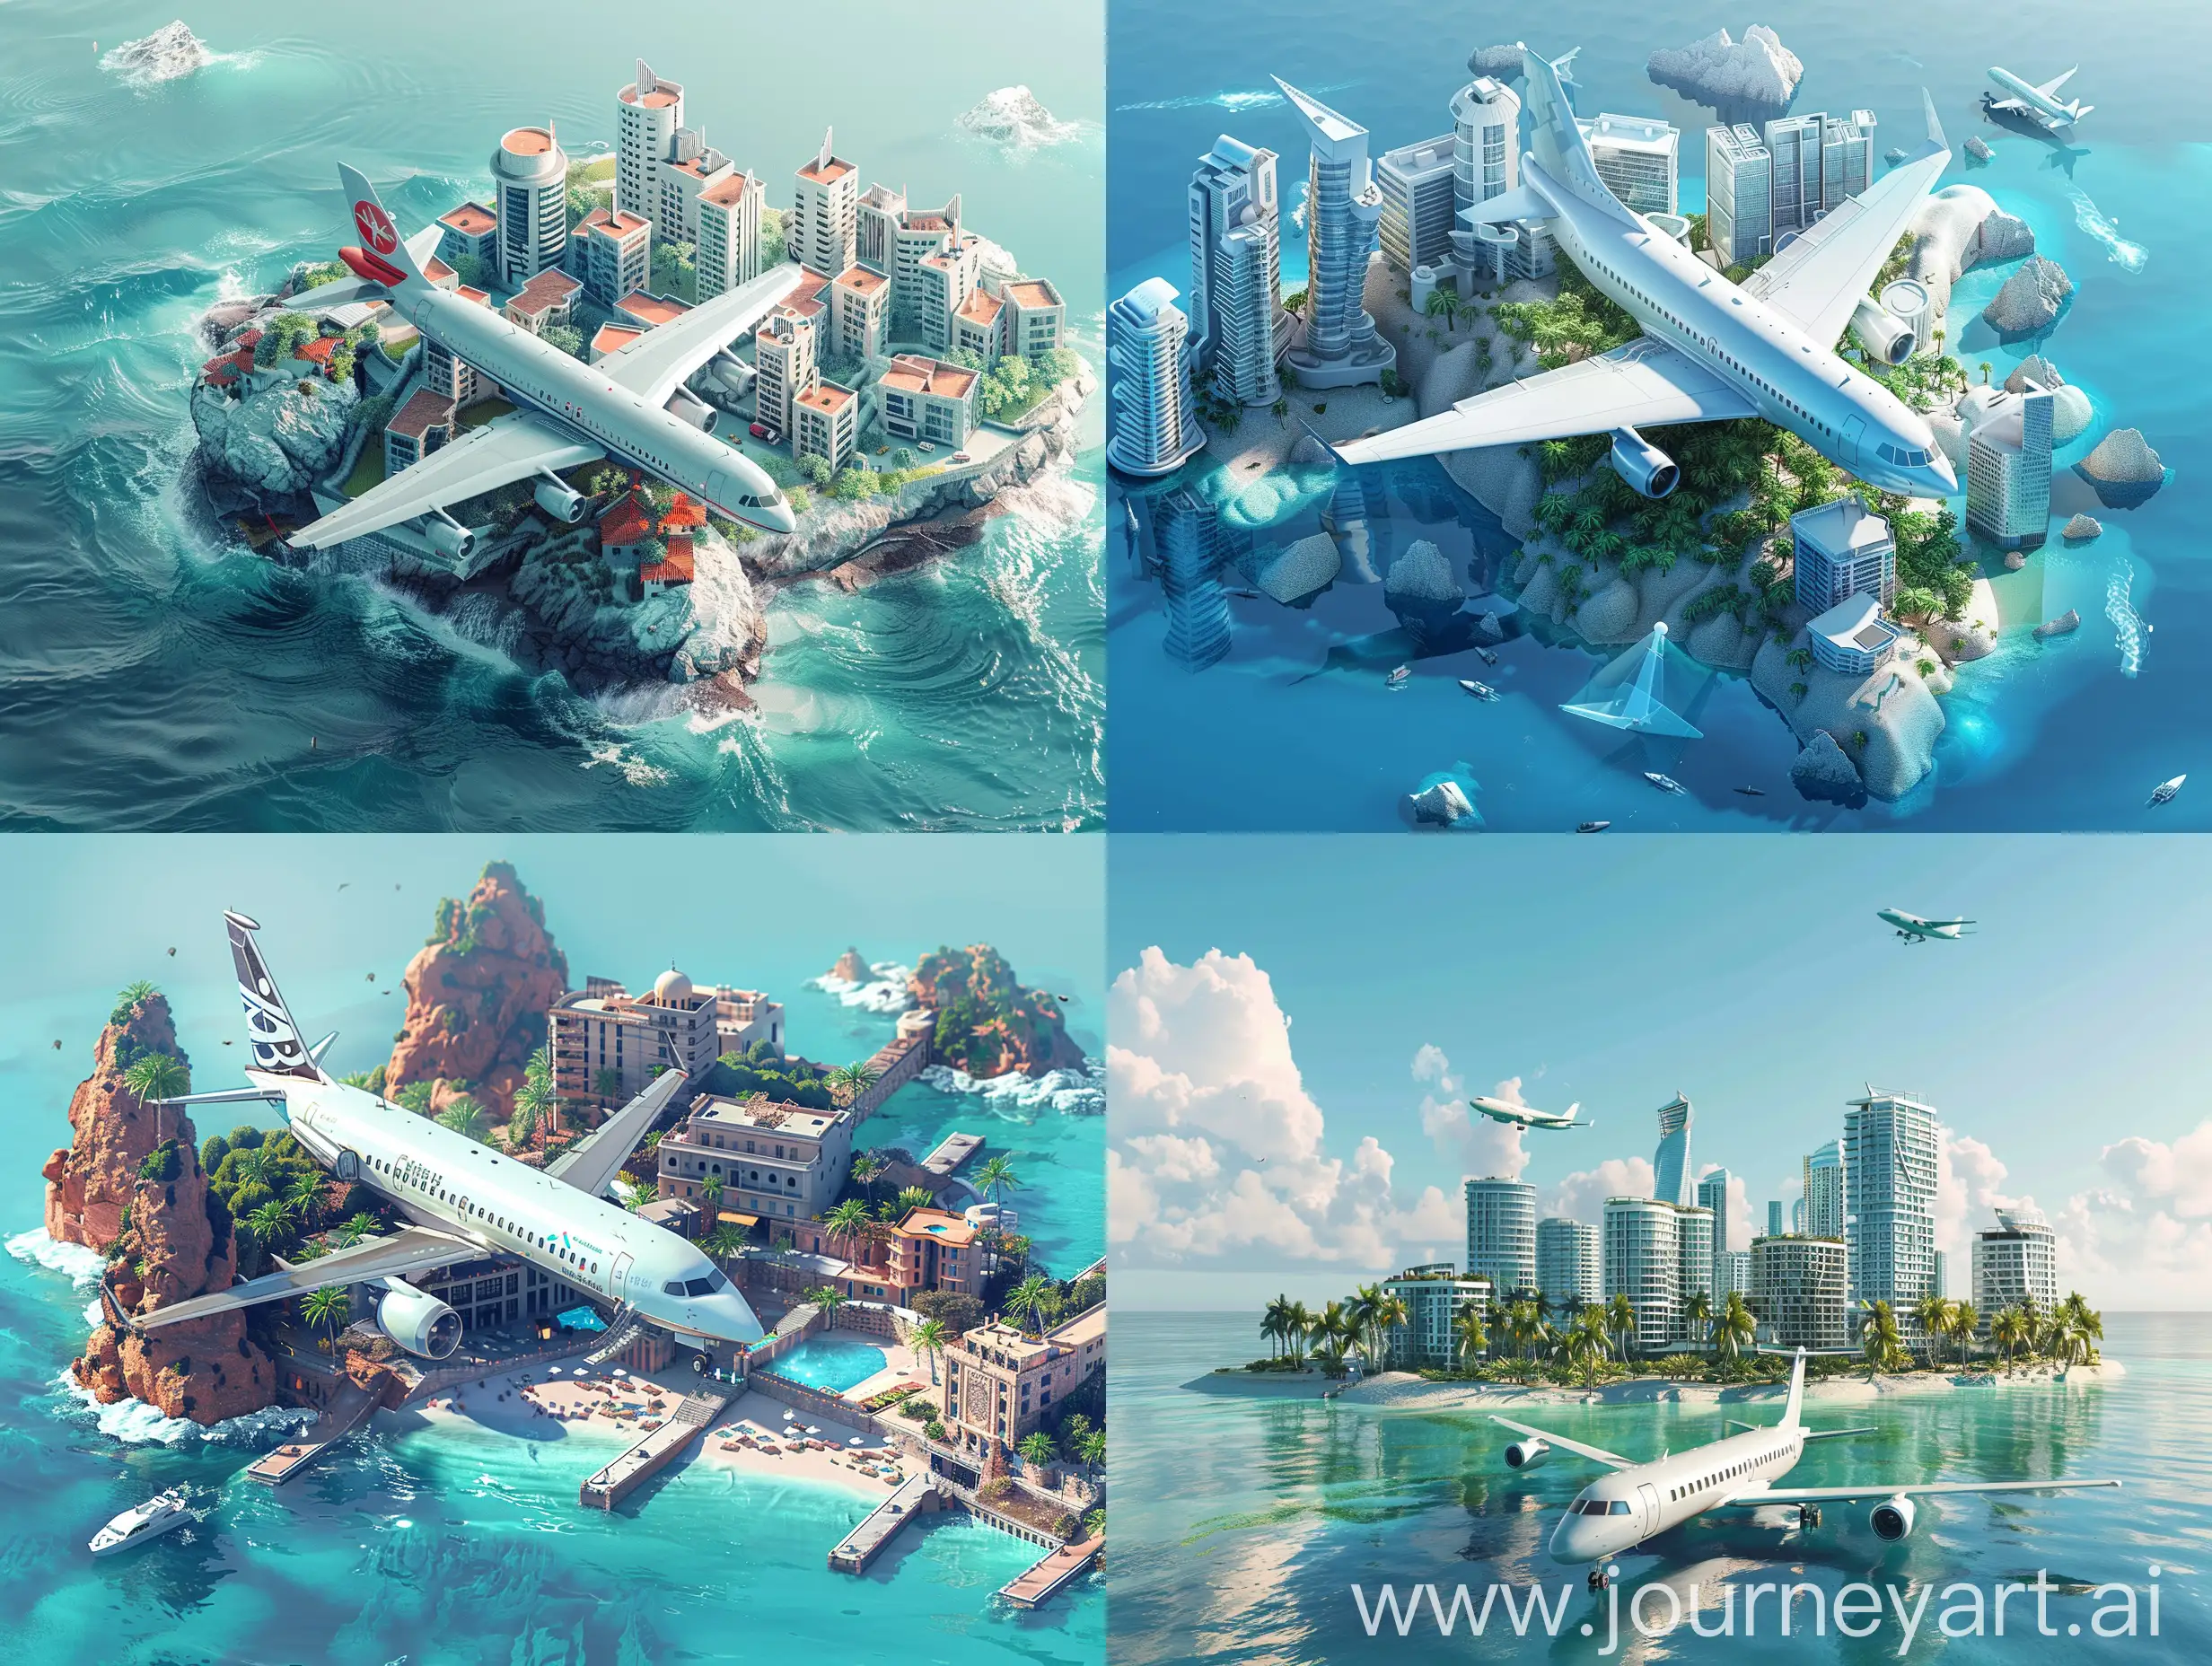 Industrial-Design-Airplane-on-Island-with-Buildings-and-HyperRealistic-Water